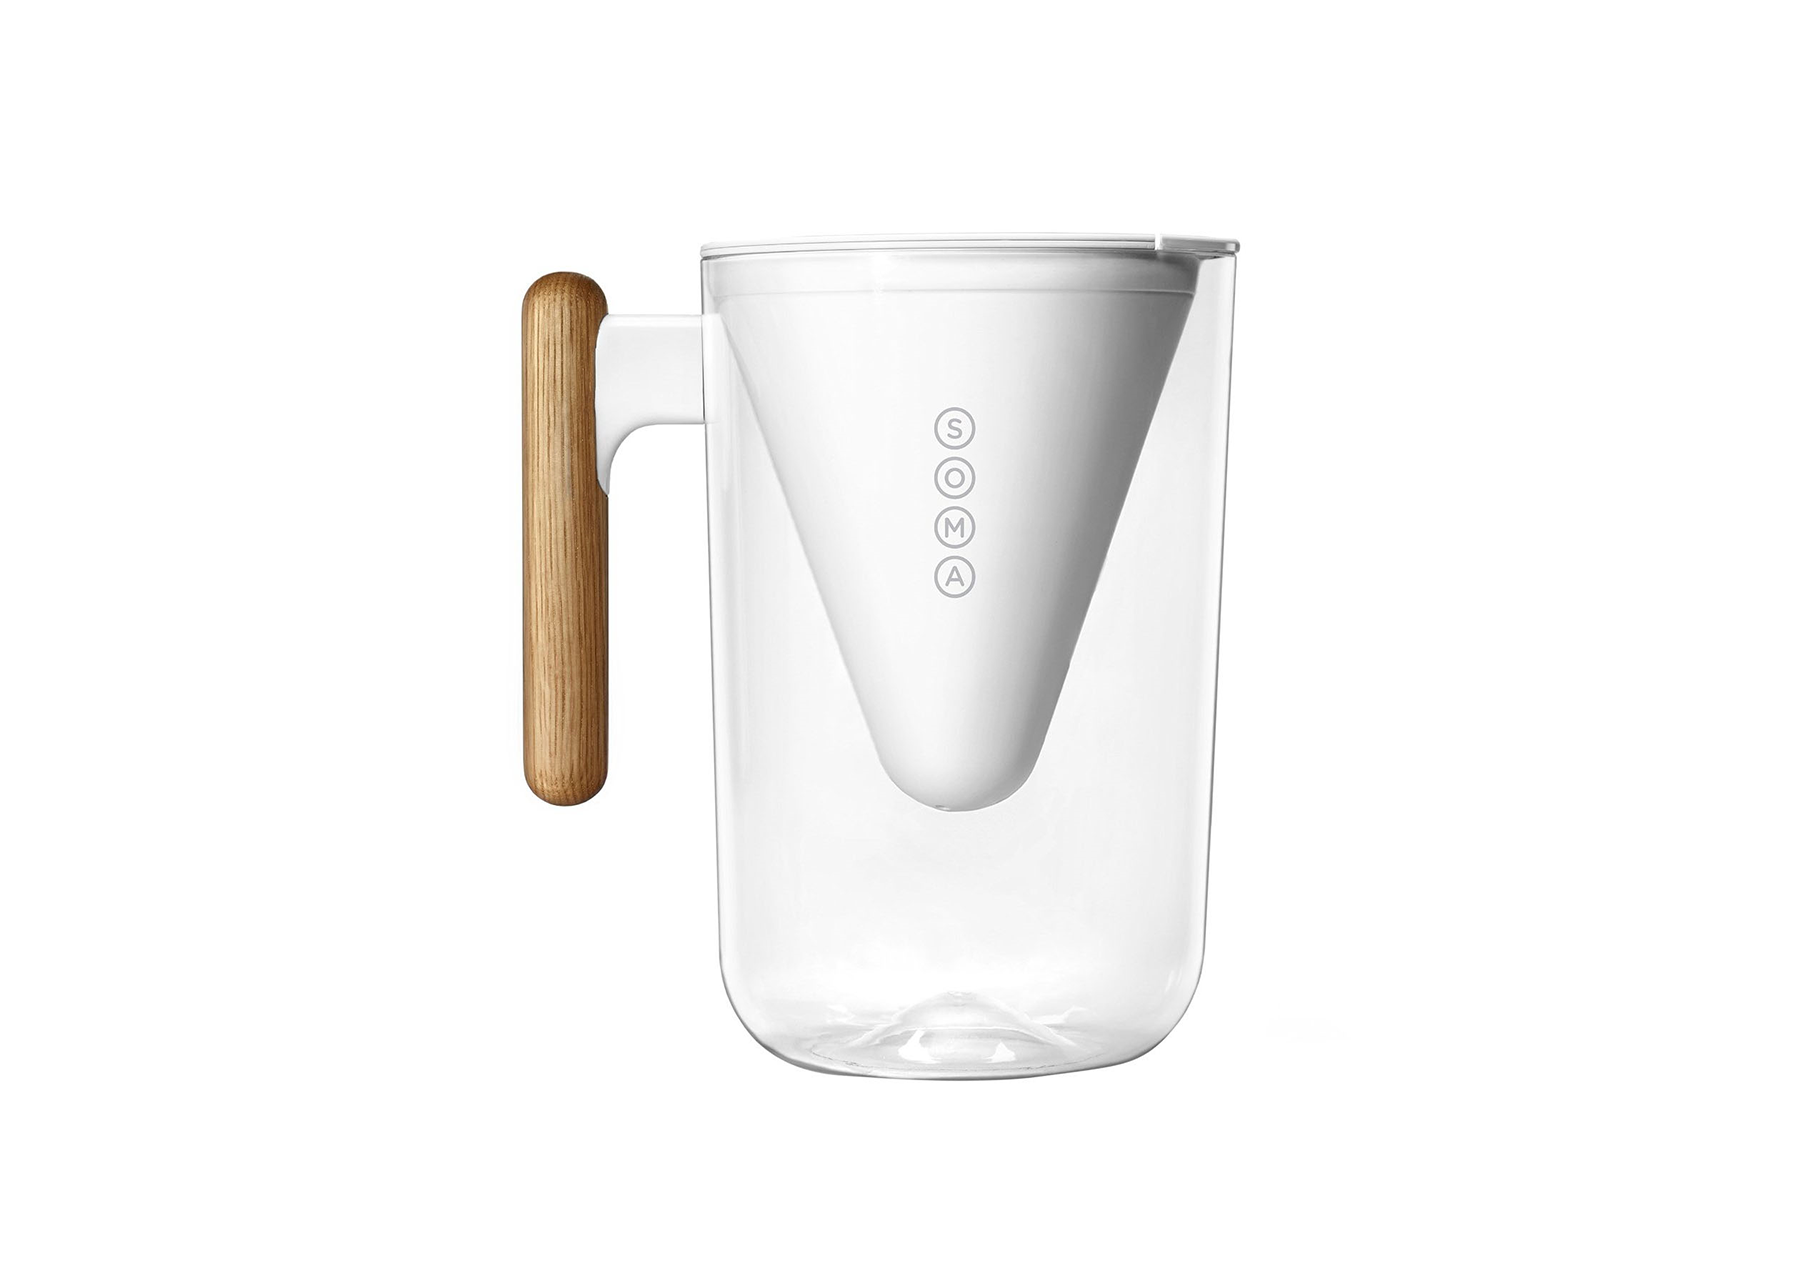 Soma duurzame waterfilter